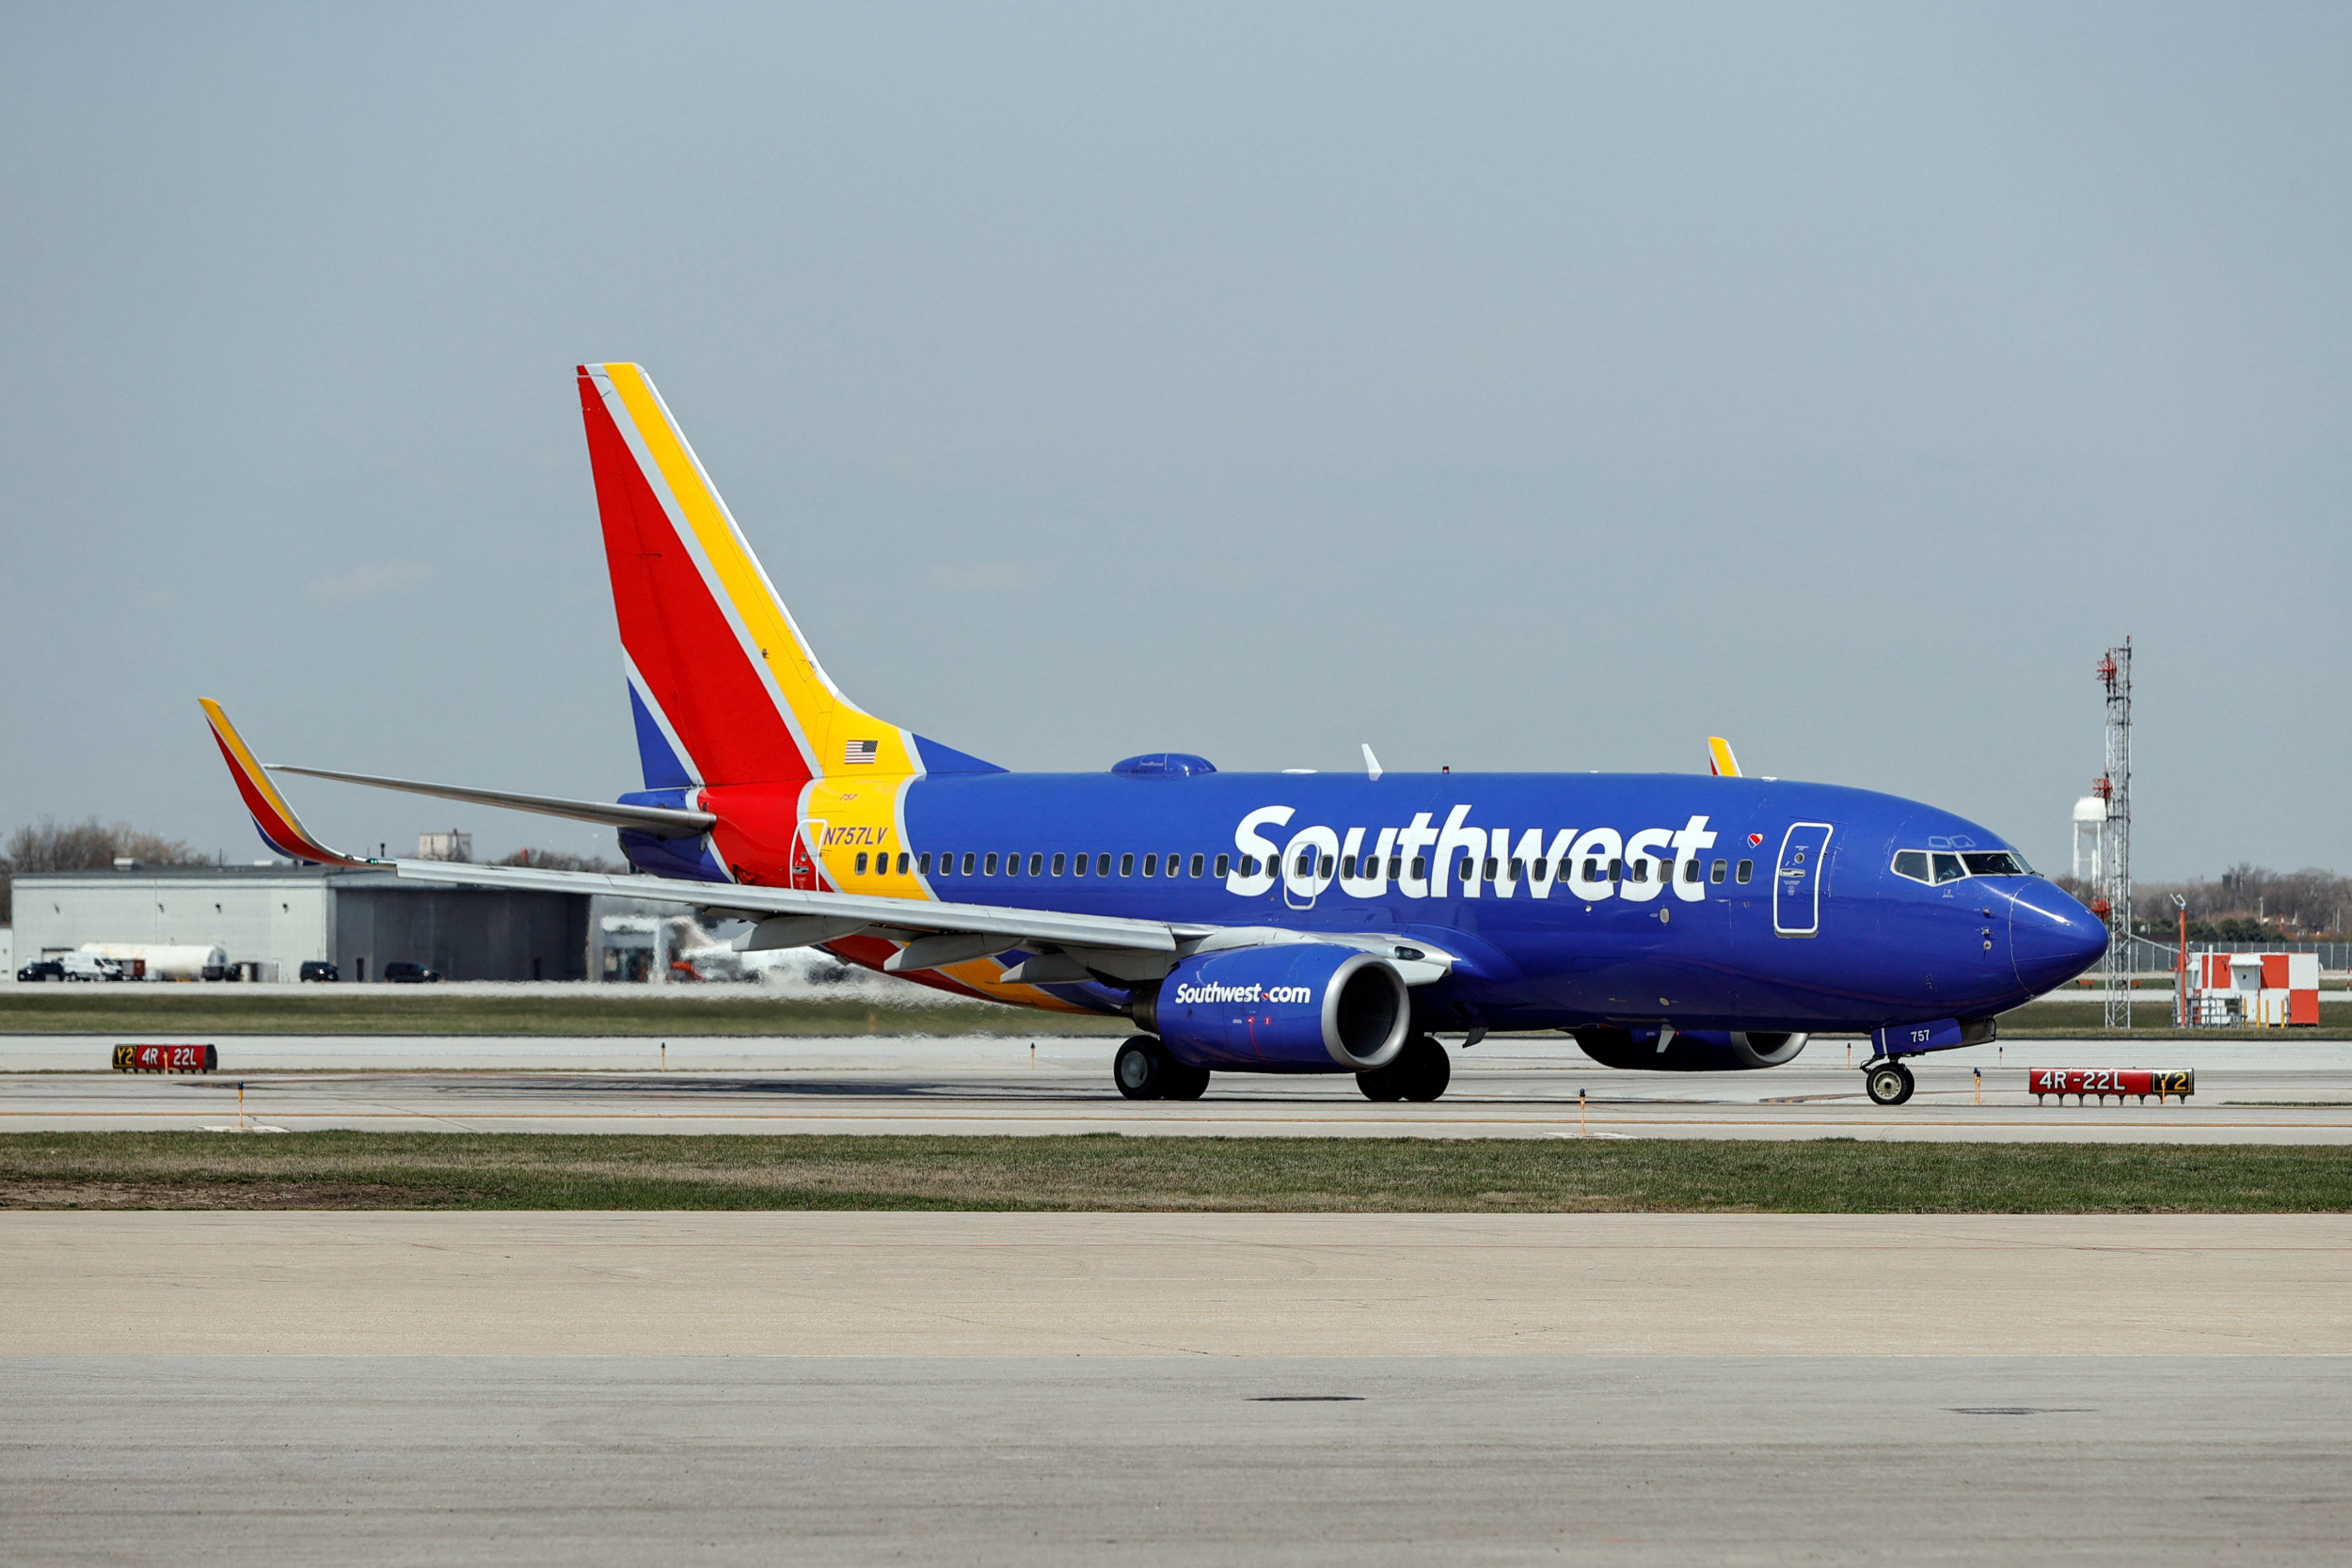 Southwest Airlines faces nationwide ground stops due to "computer issu...